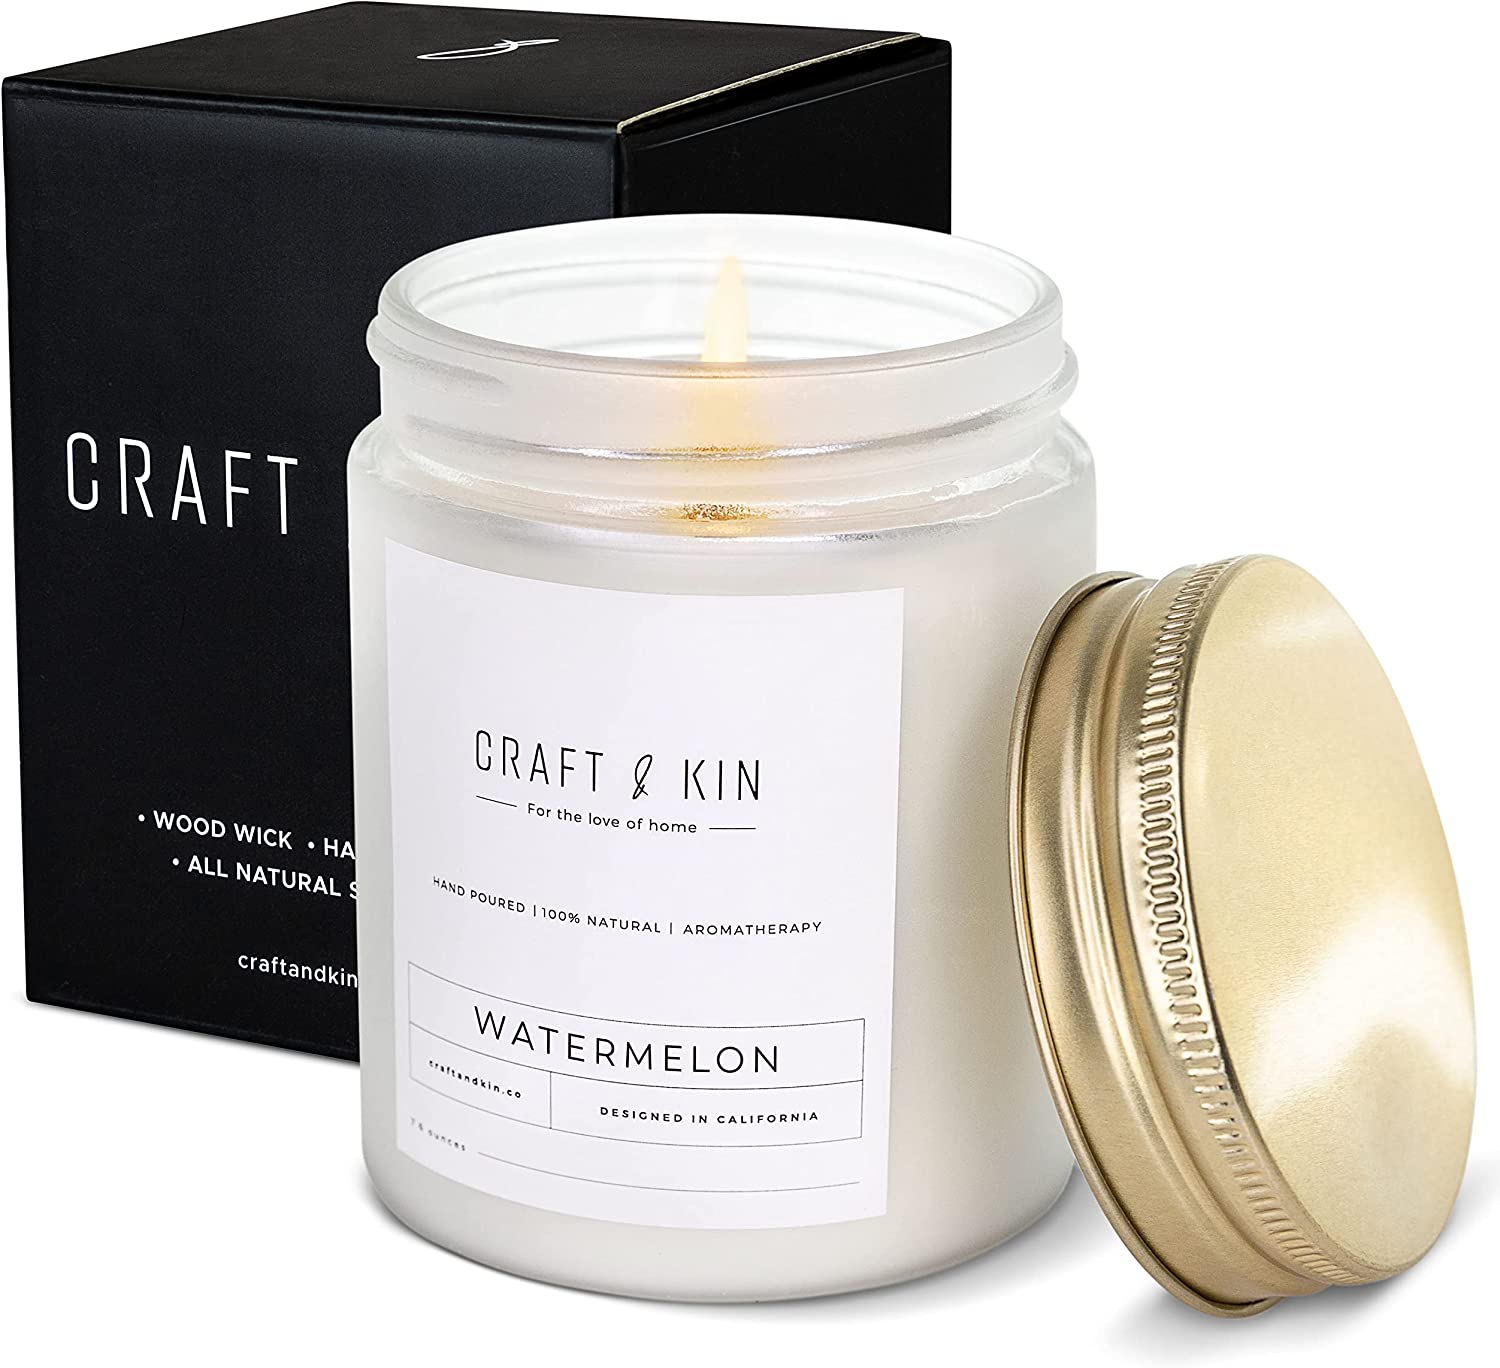 Craft & Kin Wood Wick, All-Natural Soy Aromatherapy Candle in Frosted Glass Jar with Pine & Clove Scent - 8 oz